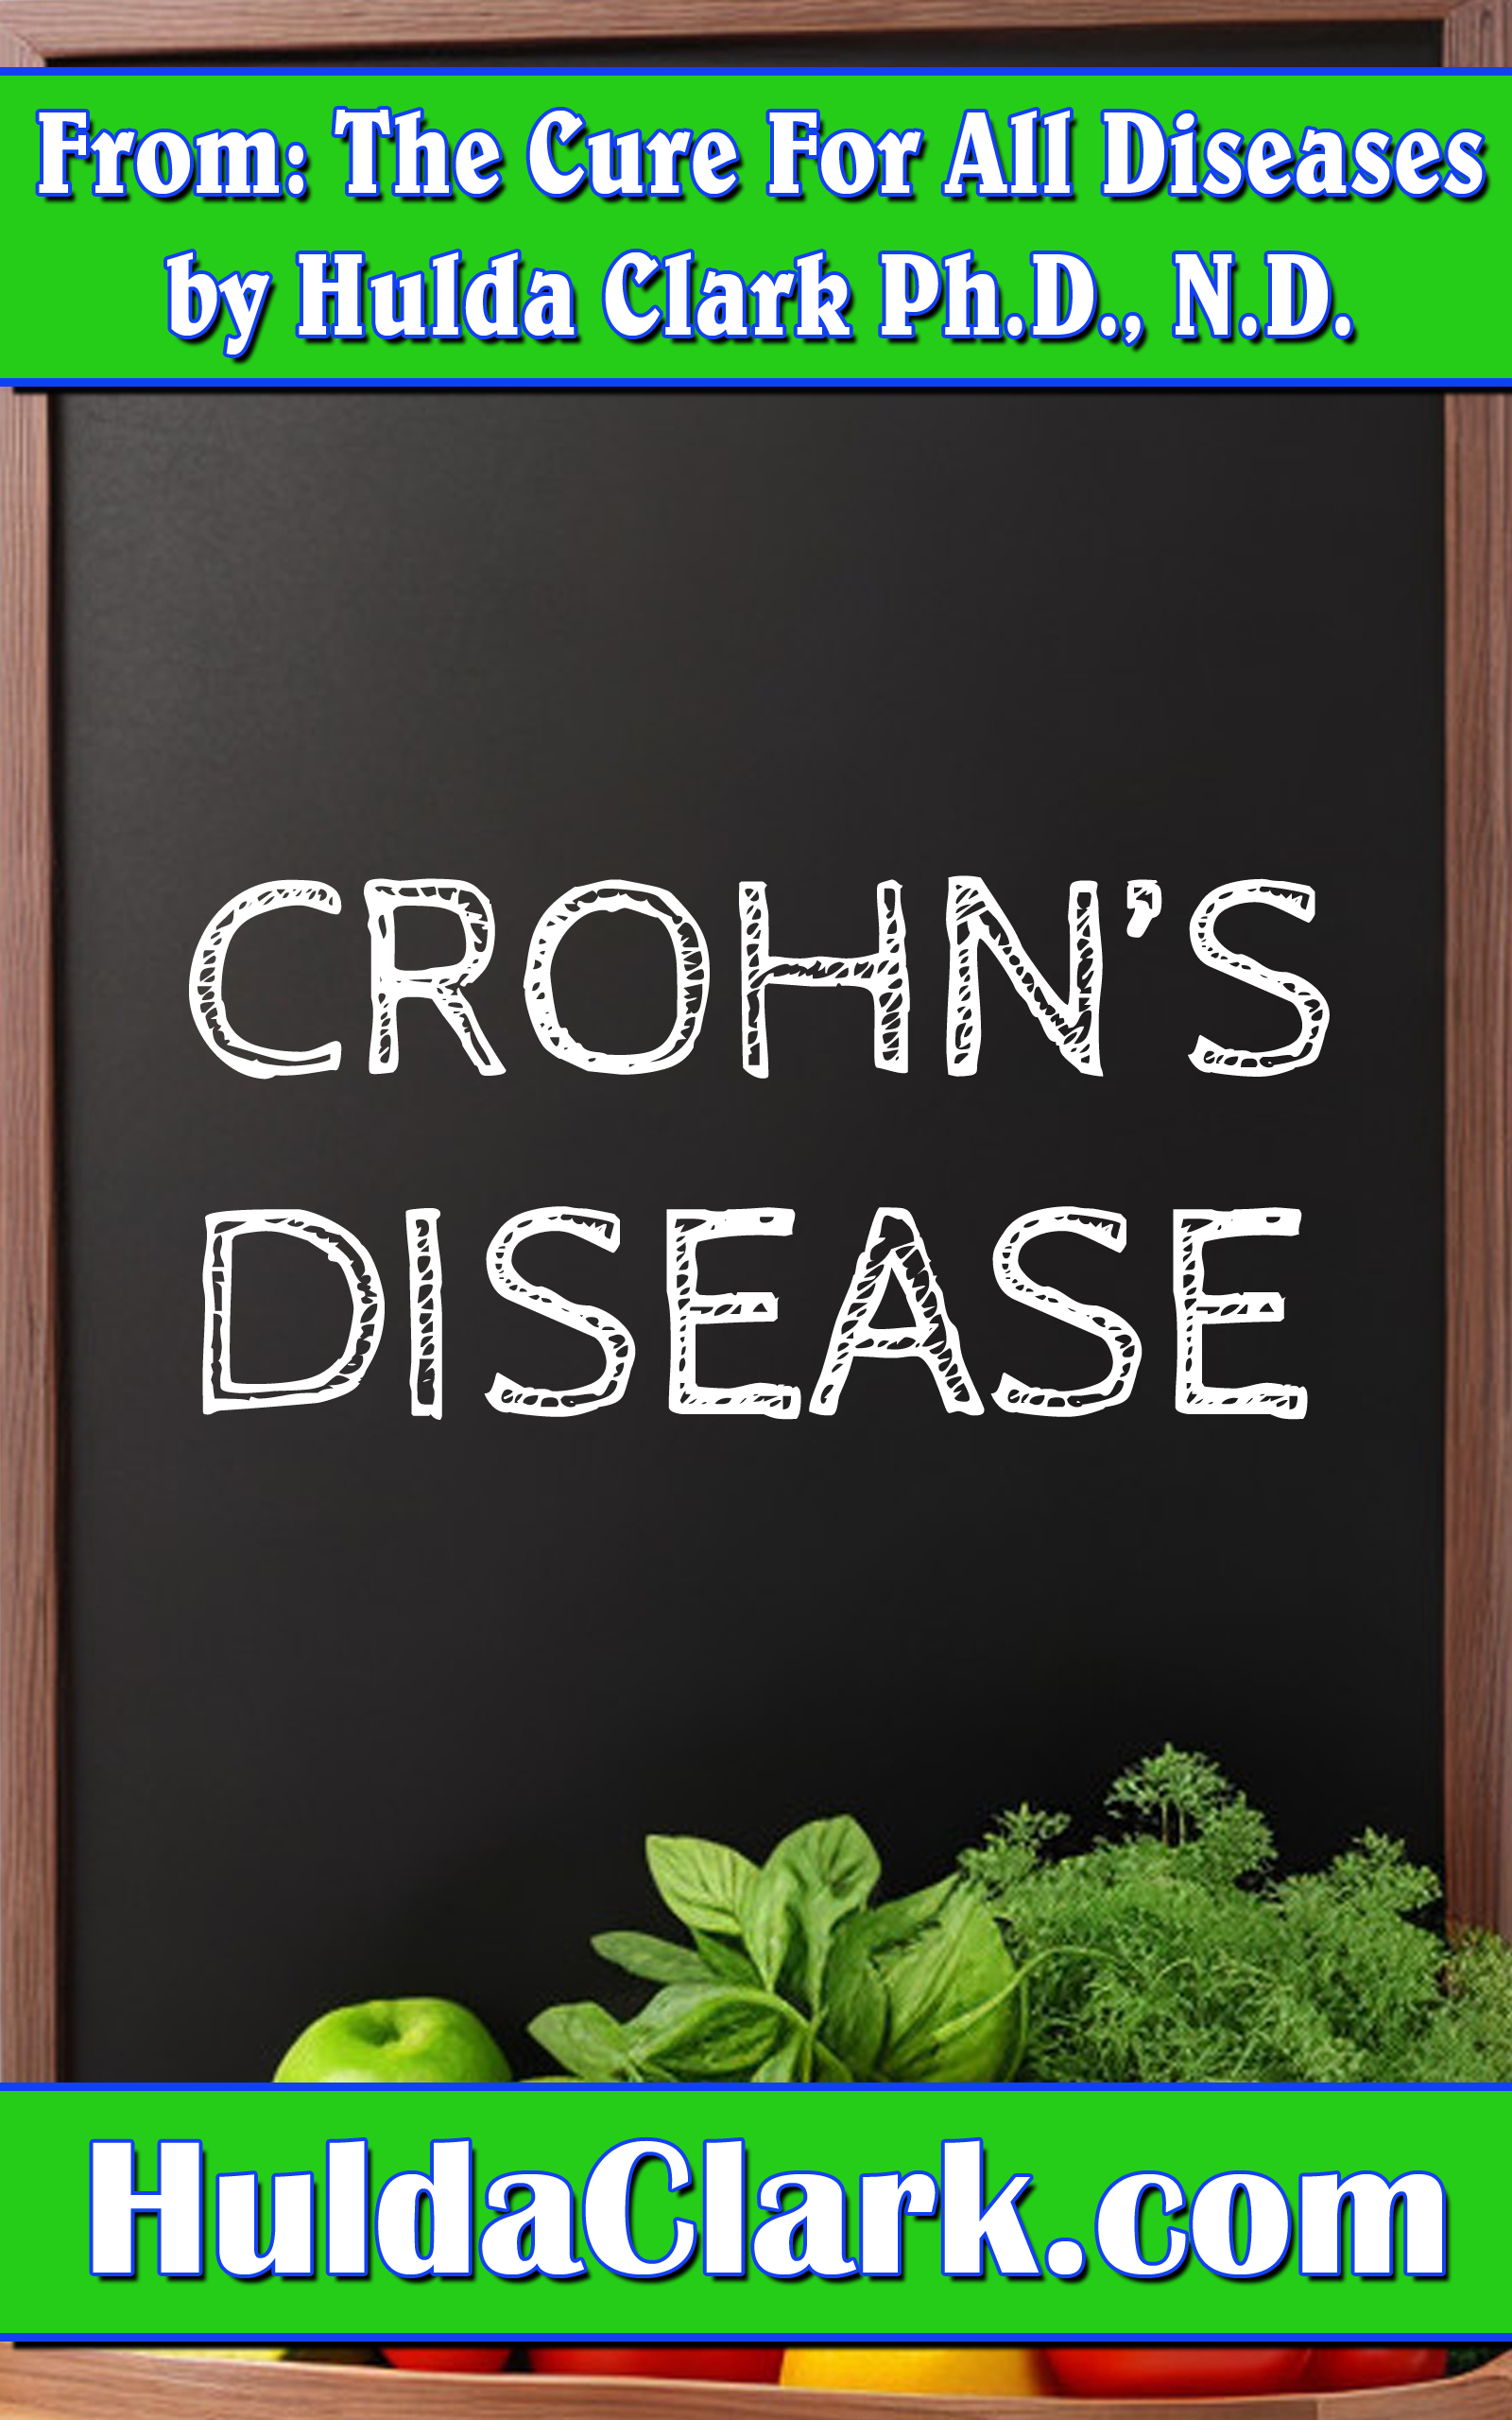 Crohns Disease Ebook excerpt from The Cure for All Diseases by Hulda Clark